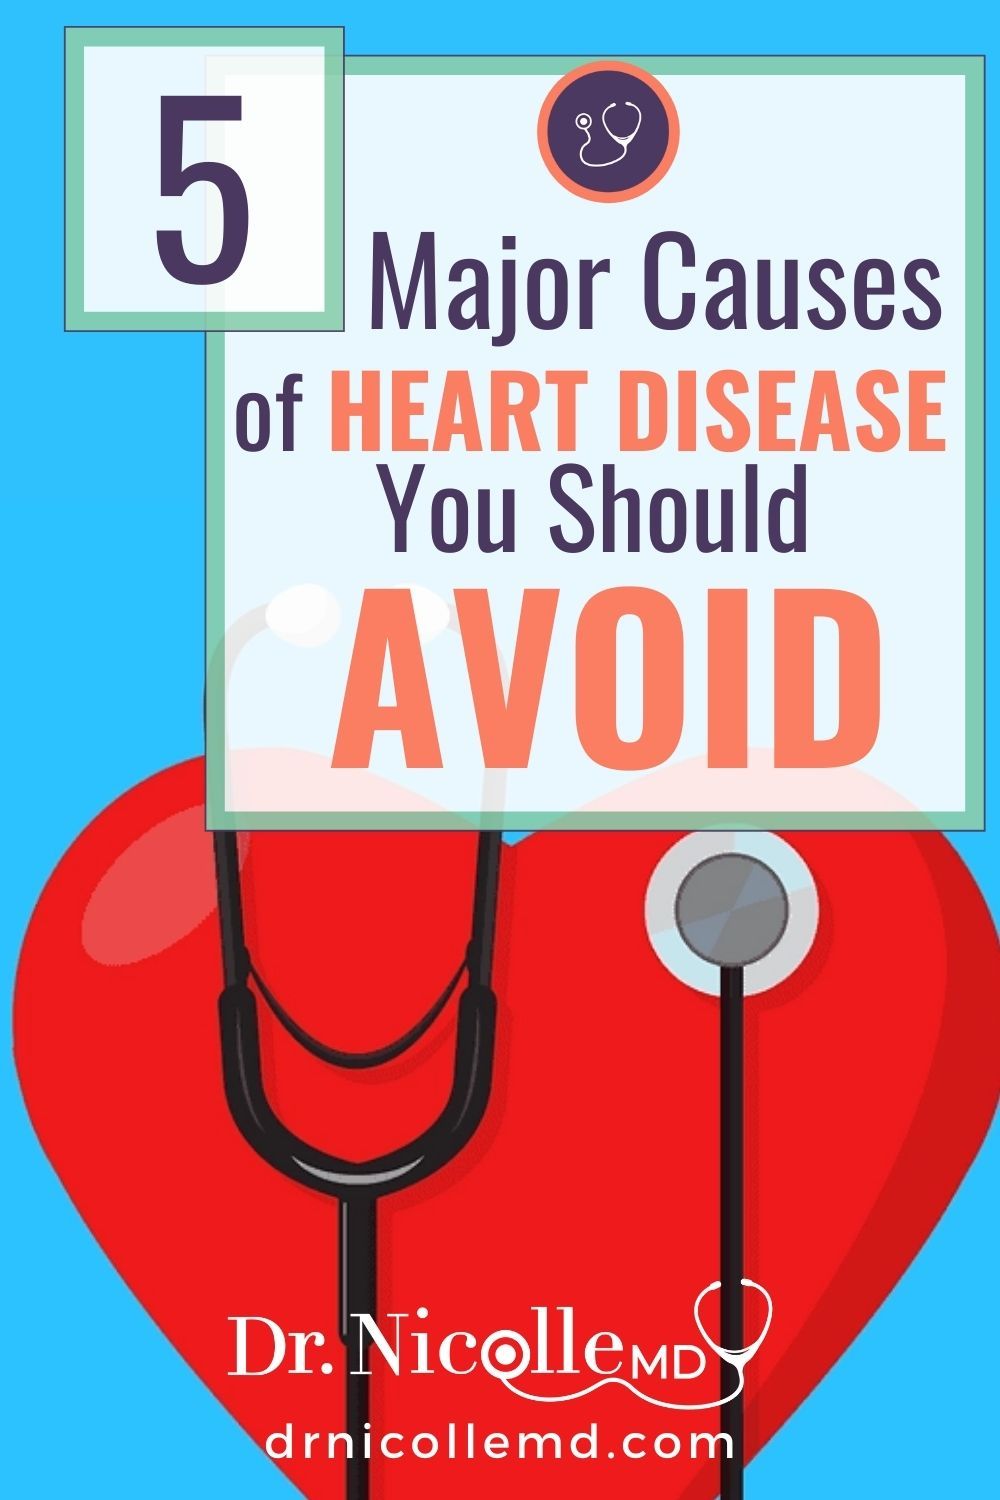 5 Major Causes of Heart Disease You Should Avoid